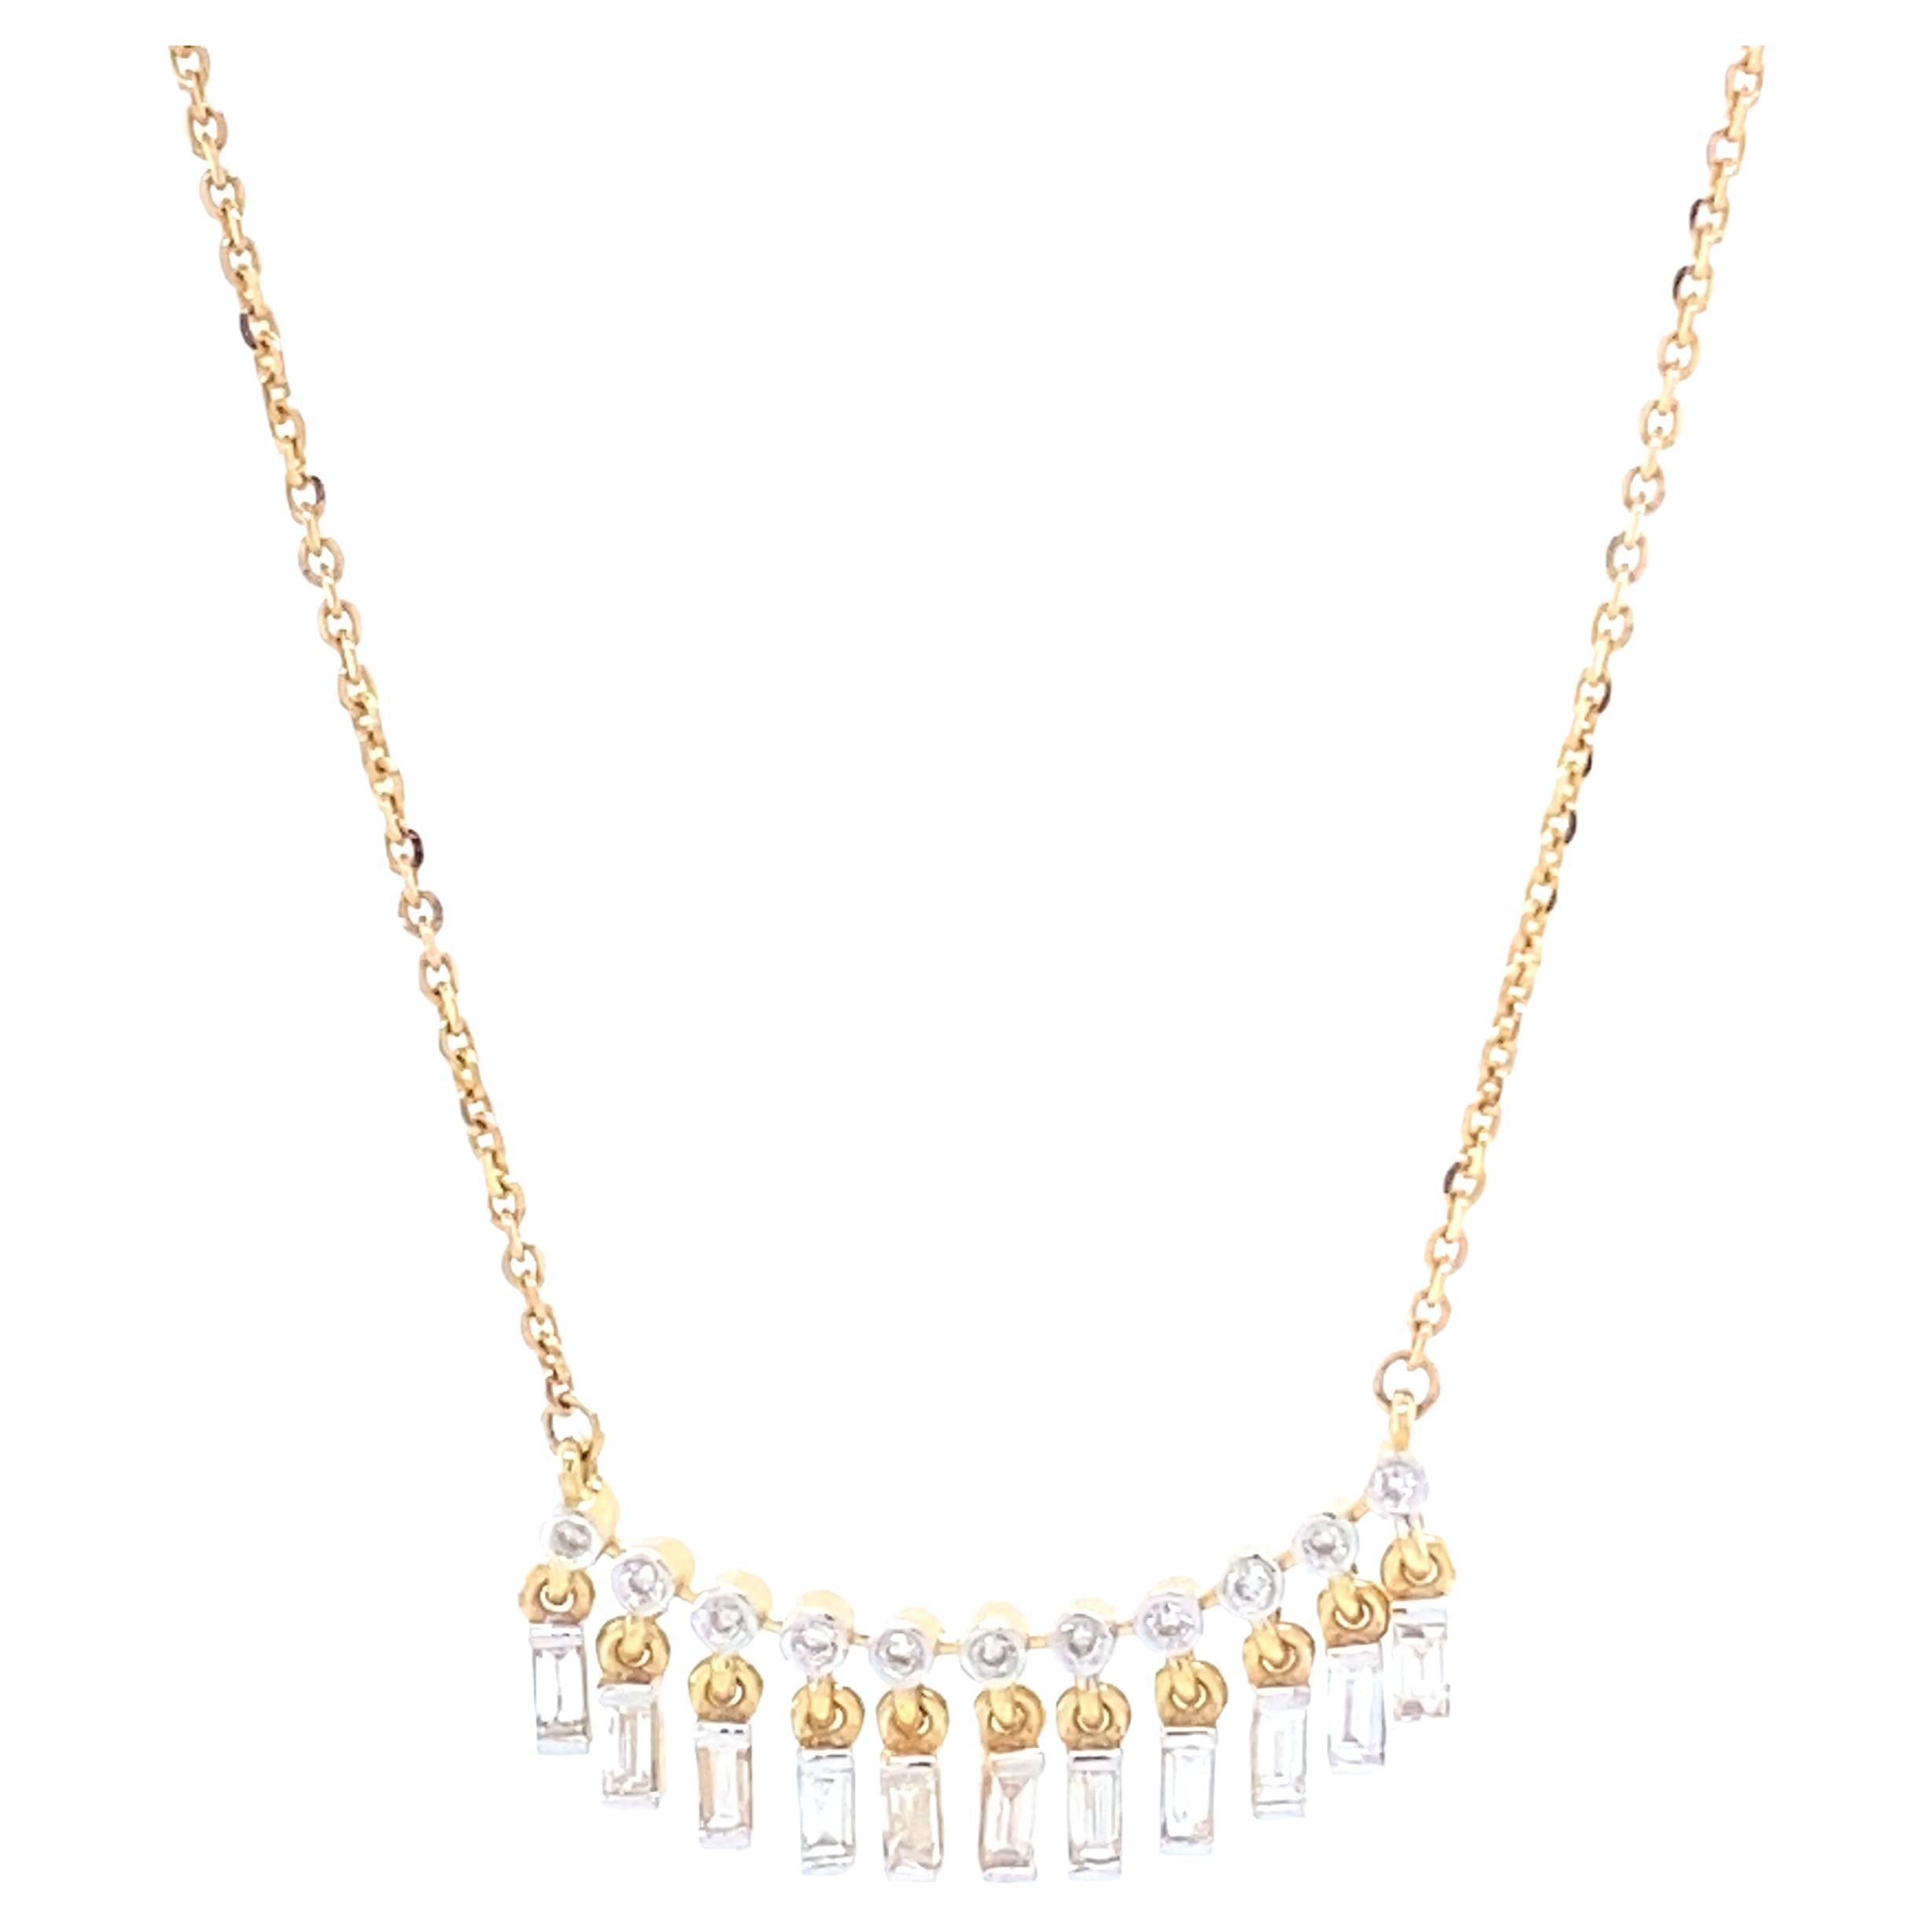 Baguette Drop And Round Diamonds Bar Pendant Necklace in 18k Solid Gold